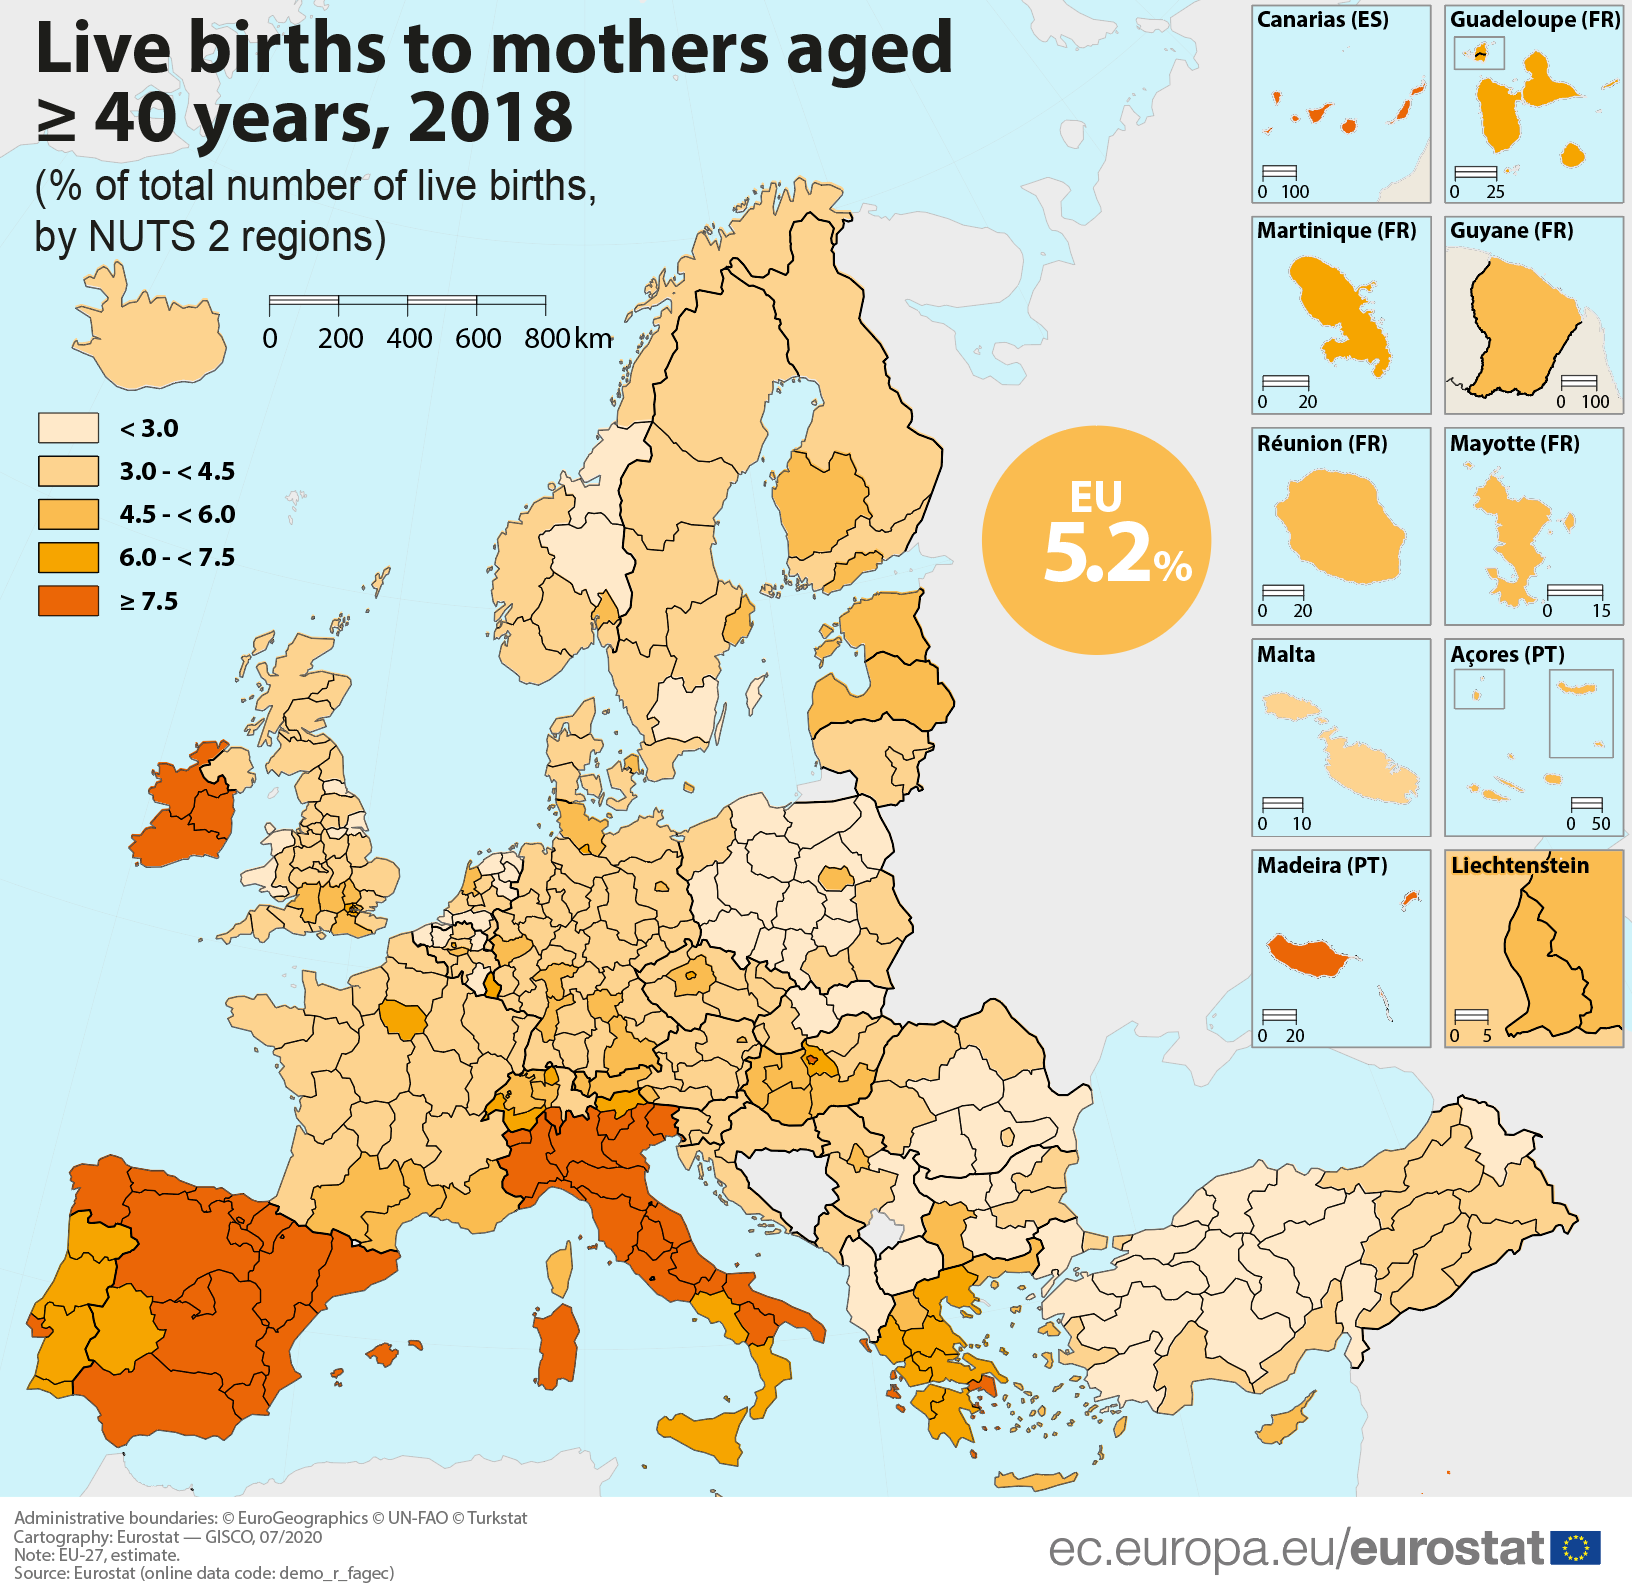 Live births to mothers aged +40 years, 2018